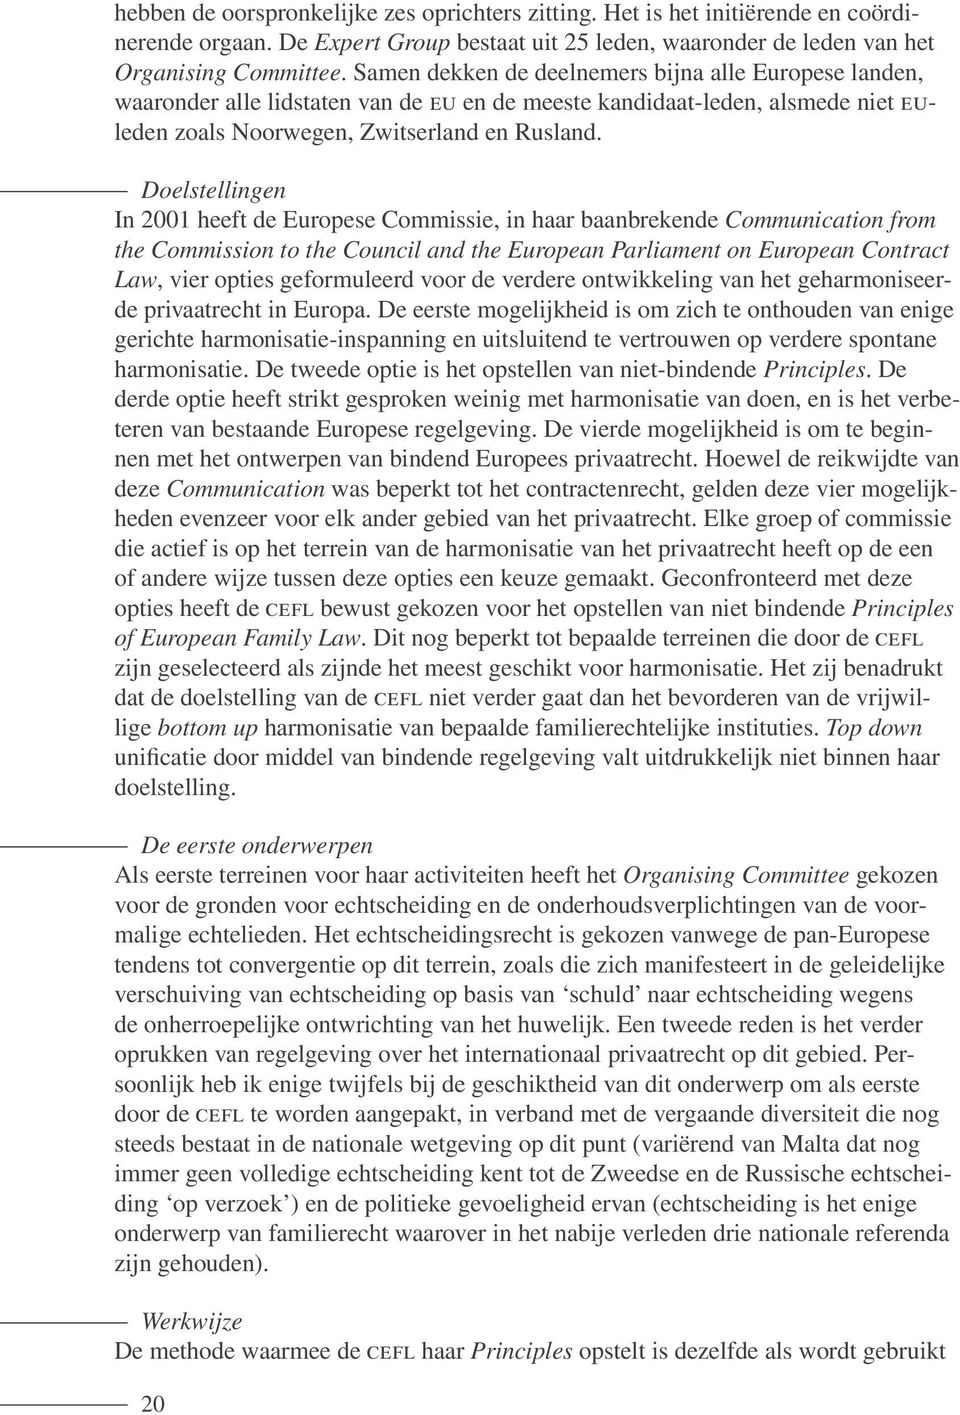 Doelstellingen In 2001 heeft de Europese Commissie, in haar baanbrekende Communication from the Commission to the Council and the European Parliament on European Contract Law, vier opties